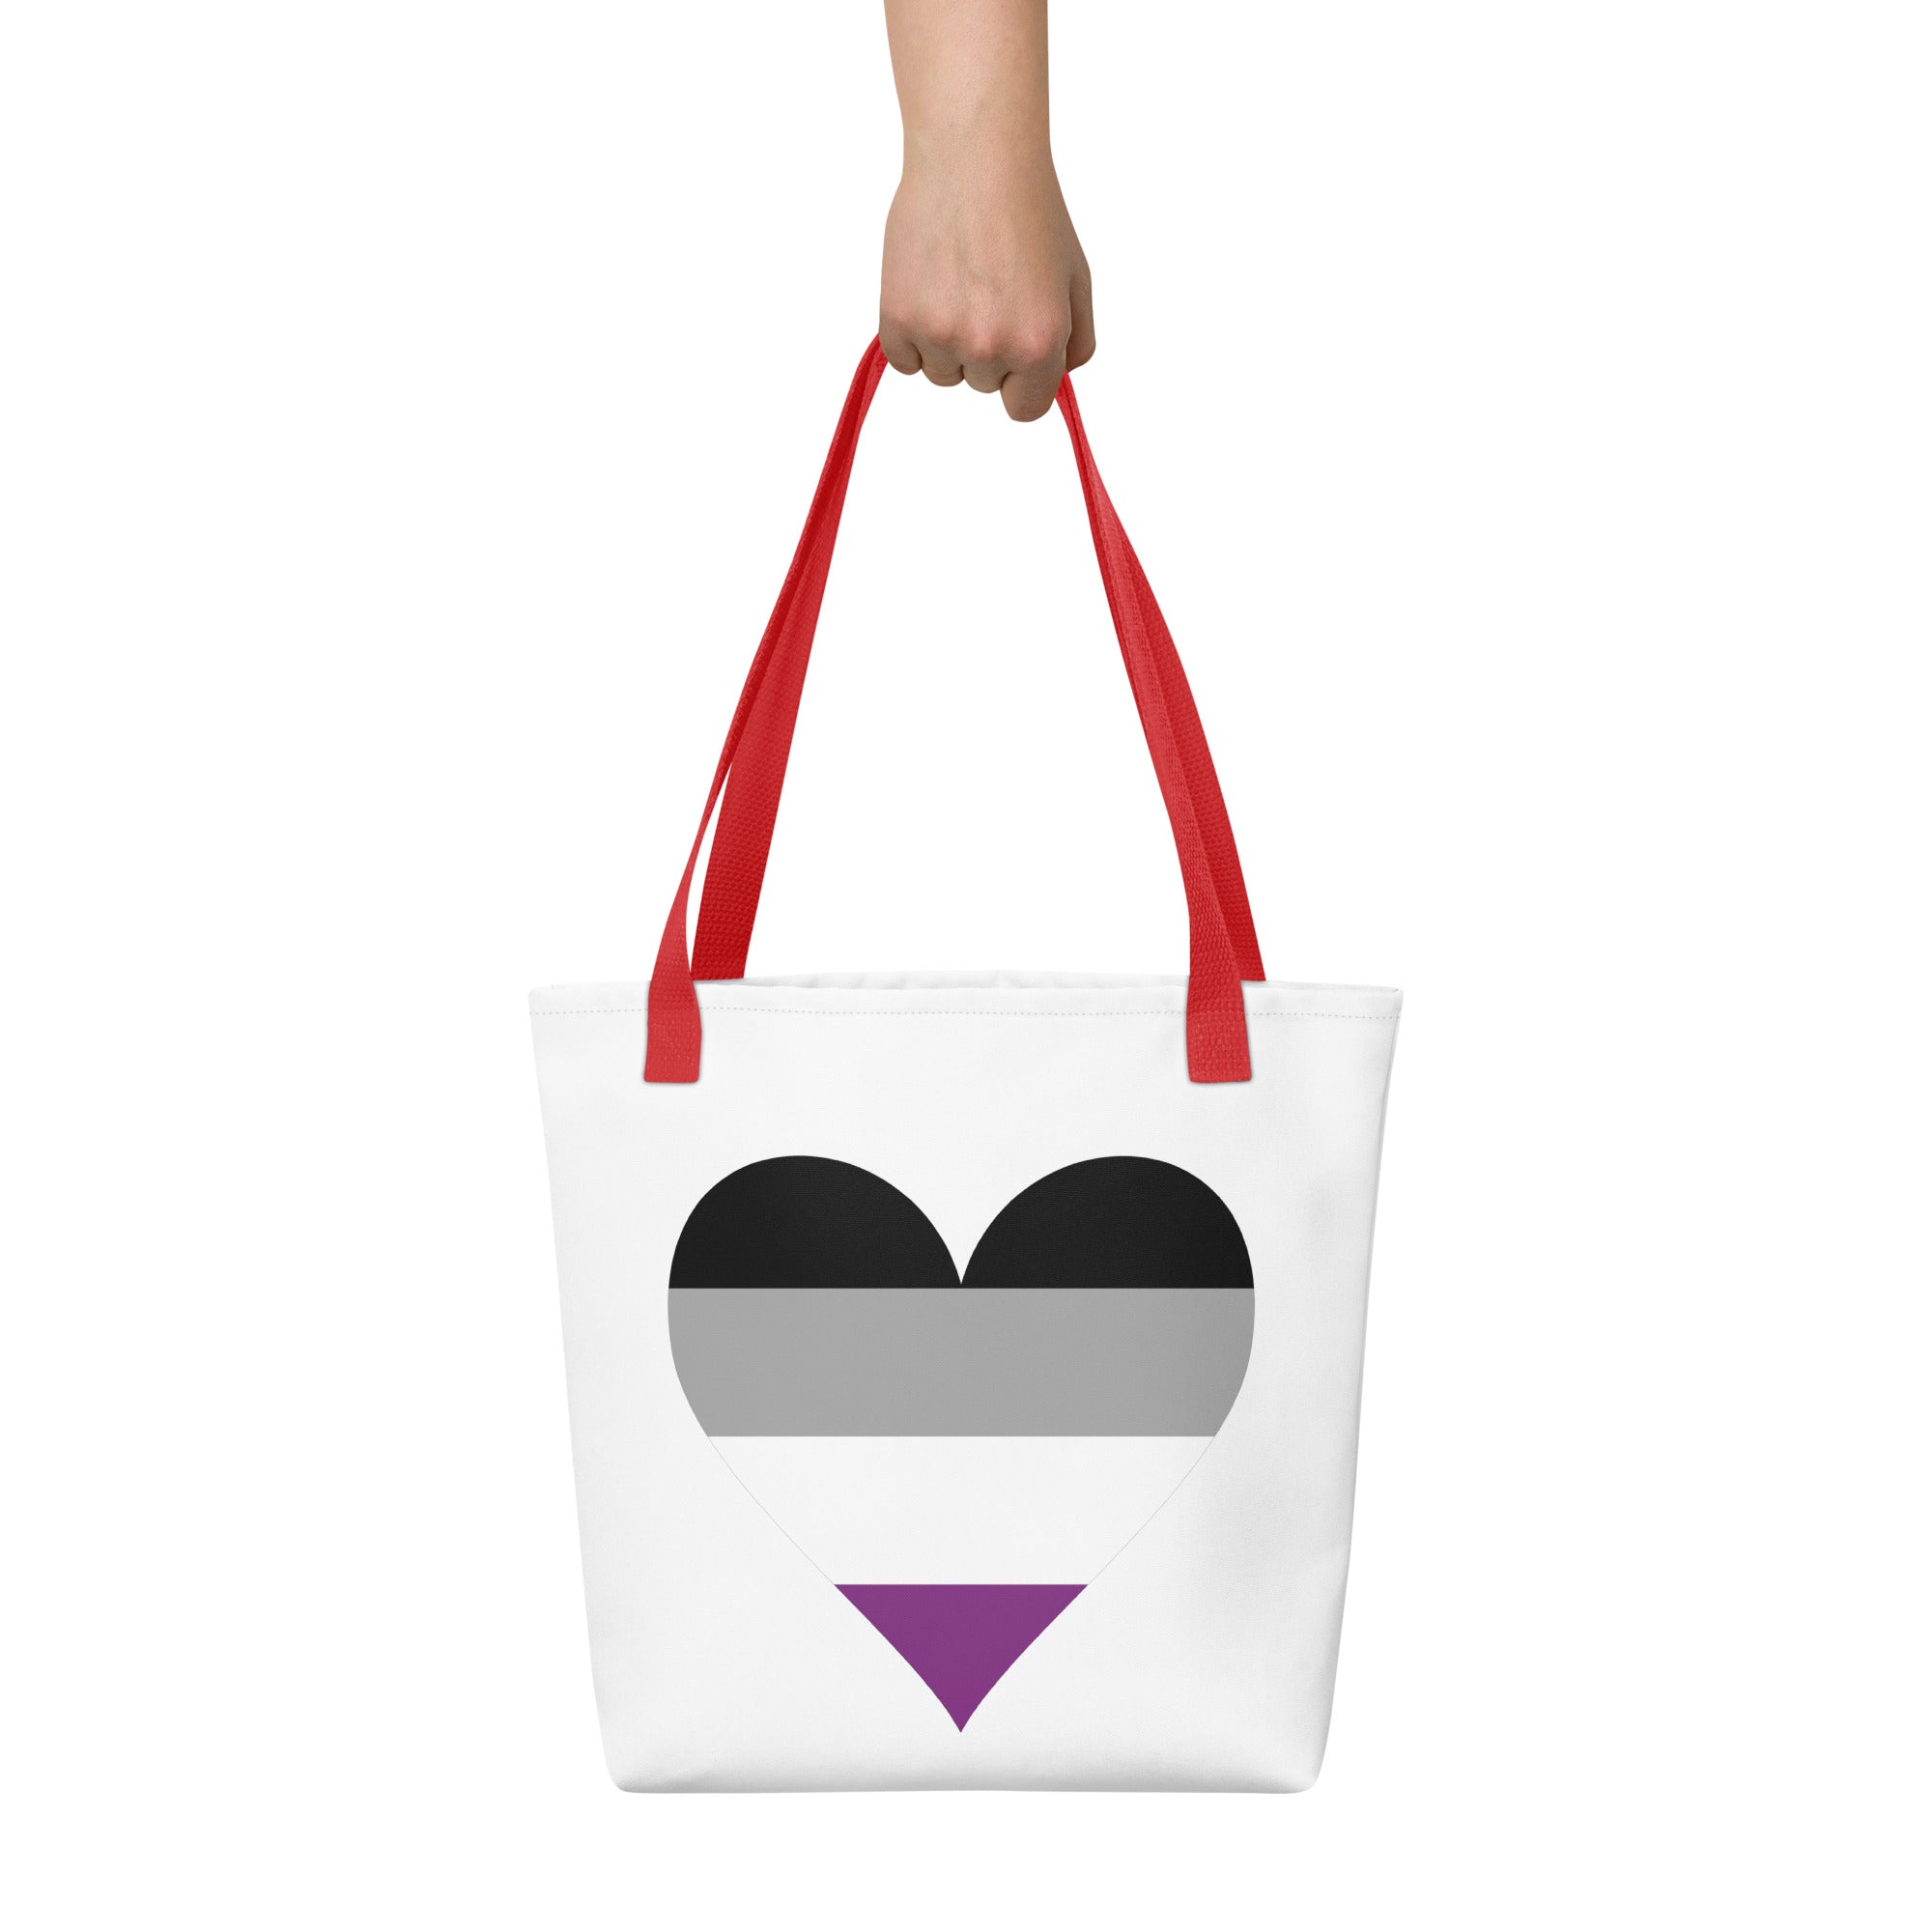 Tote bag- Asexual Heart